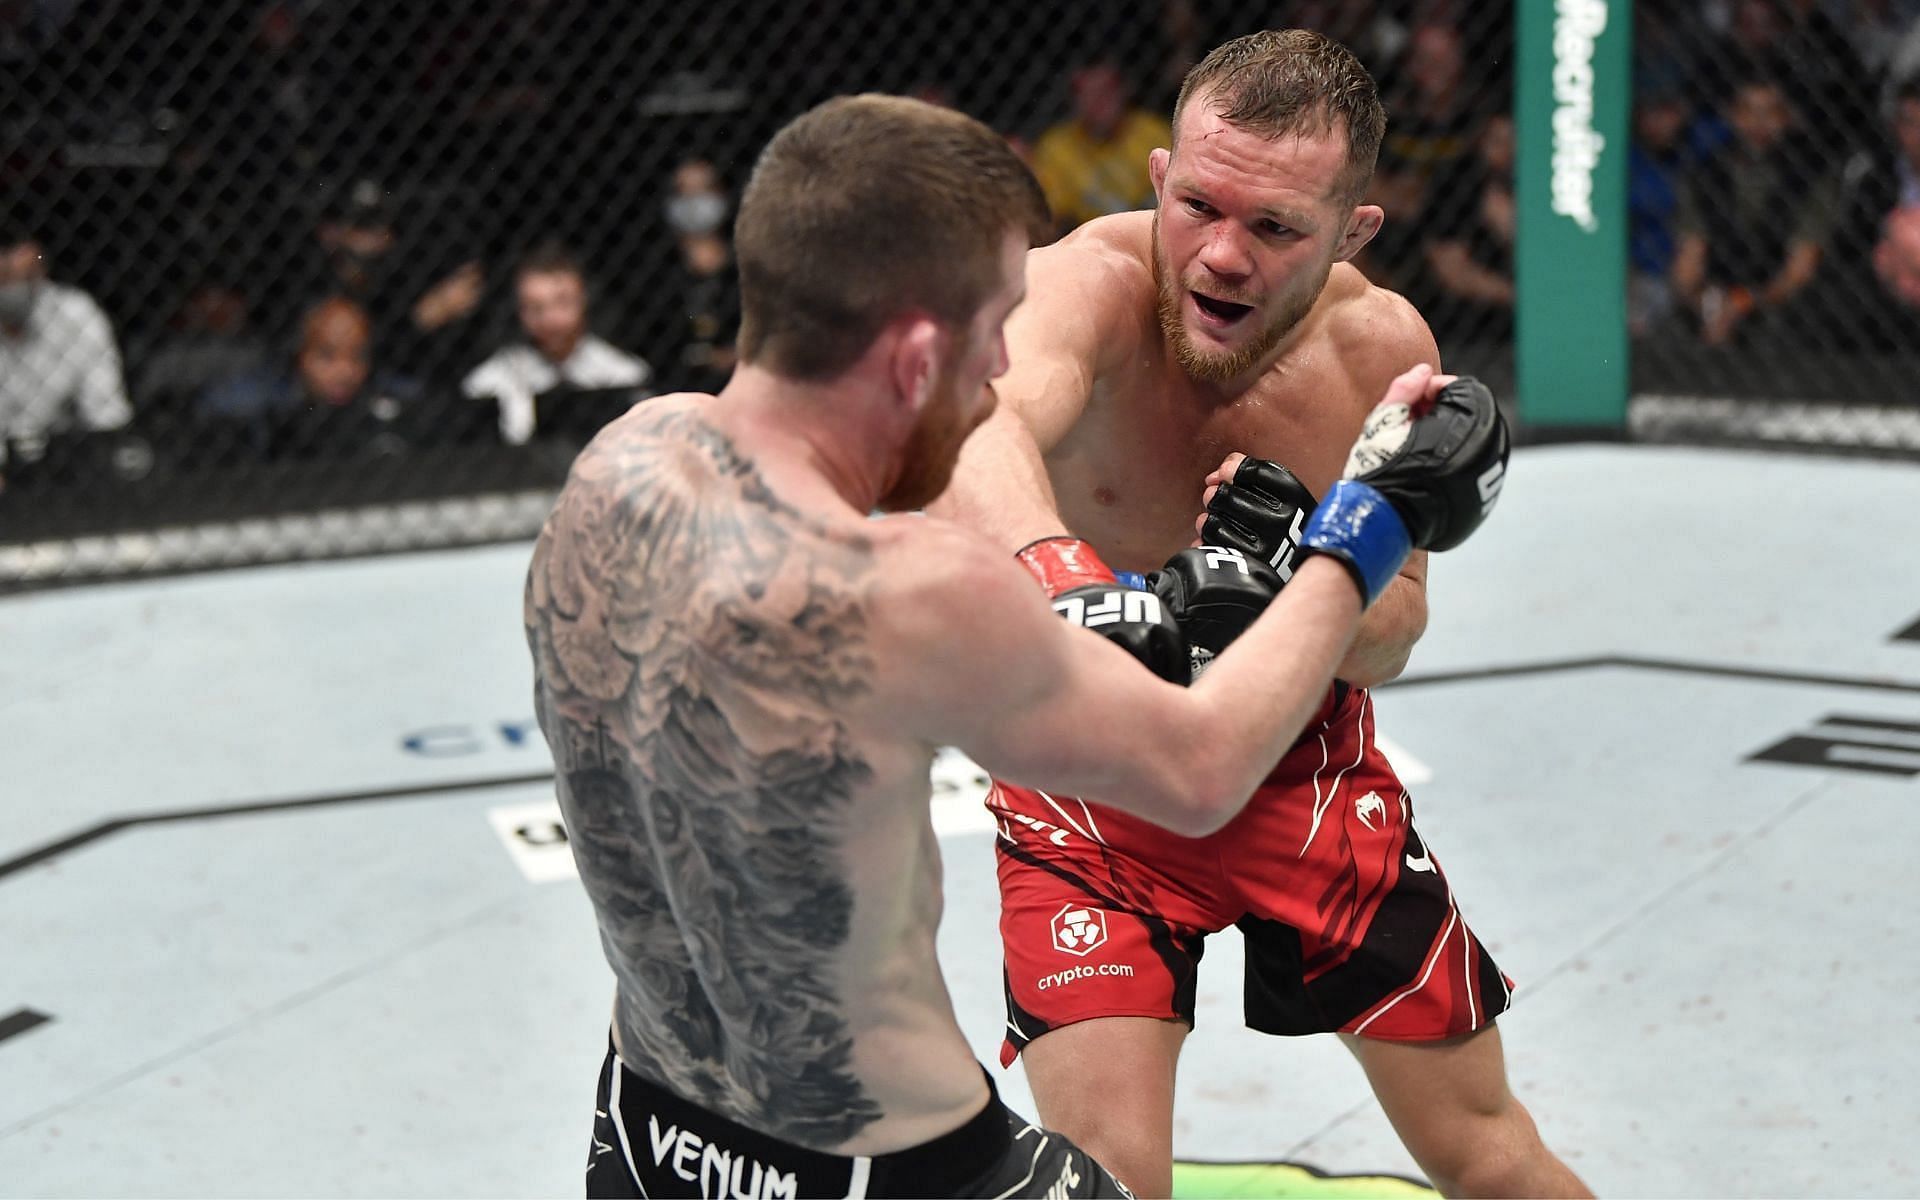 Petr Yan outpointed Cory Sandhagen in an instant classic title bout